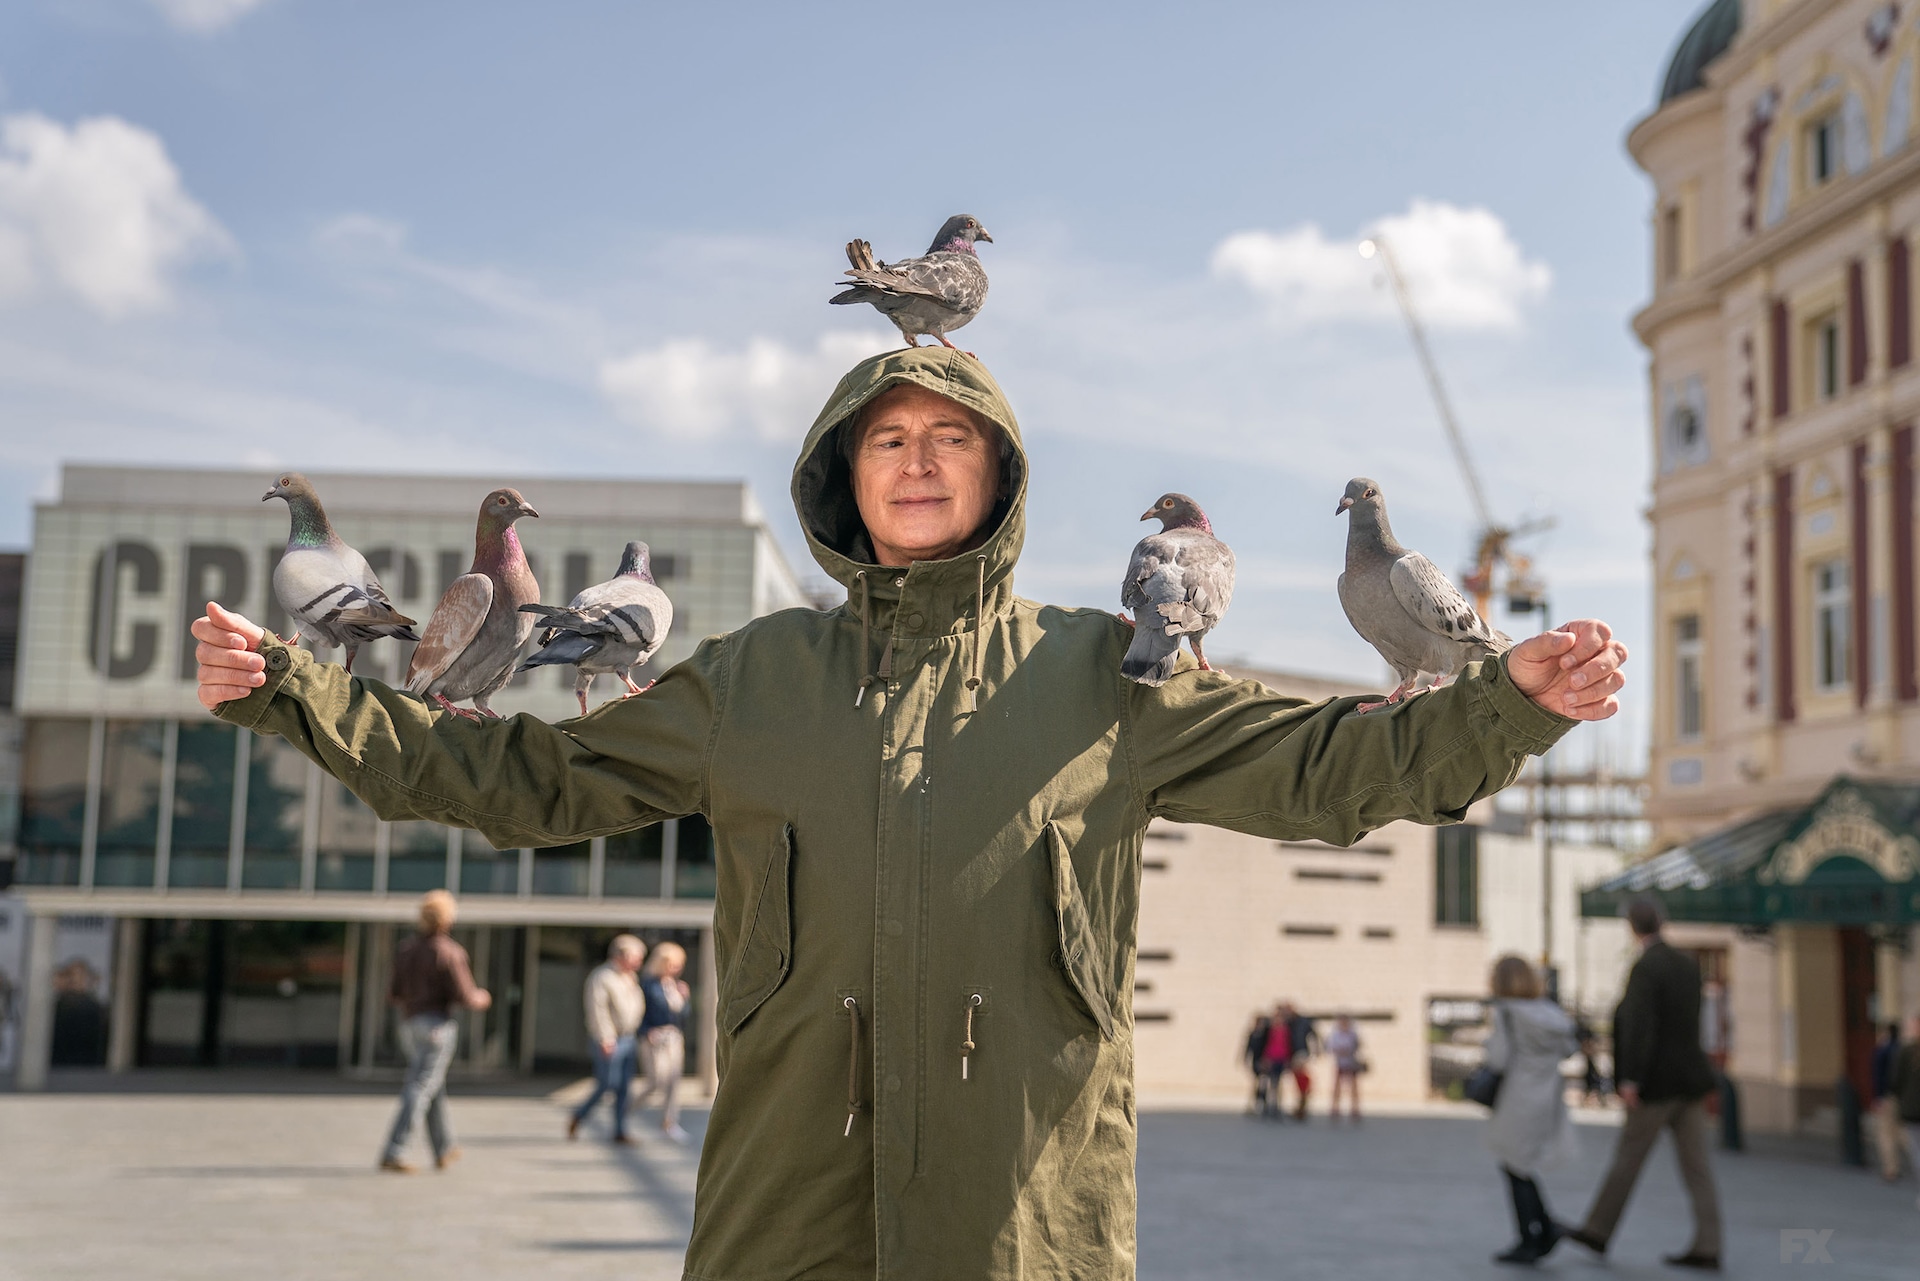 Gaz wearing a green jacket with a hood and pigeons sitting on his arms and head